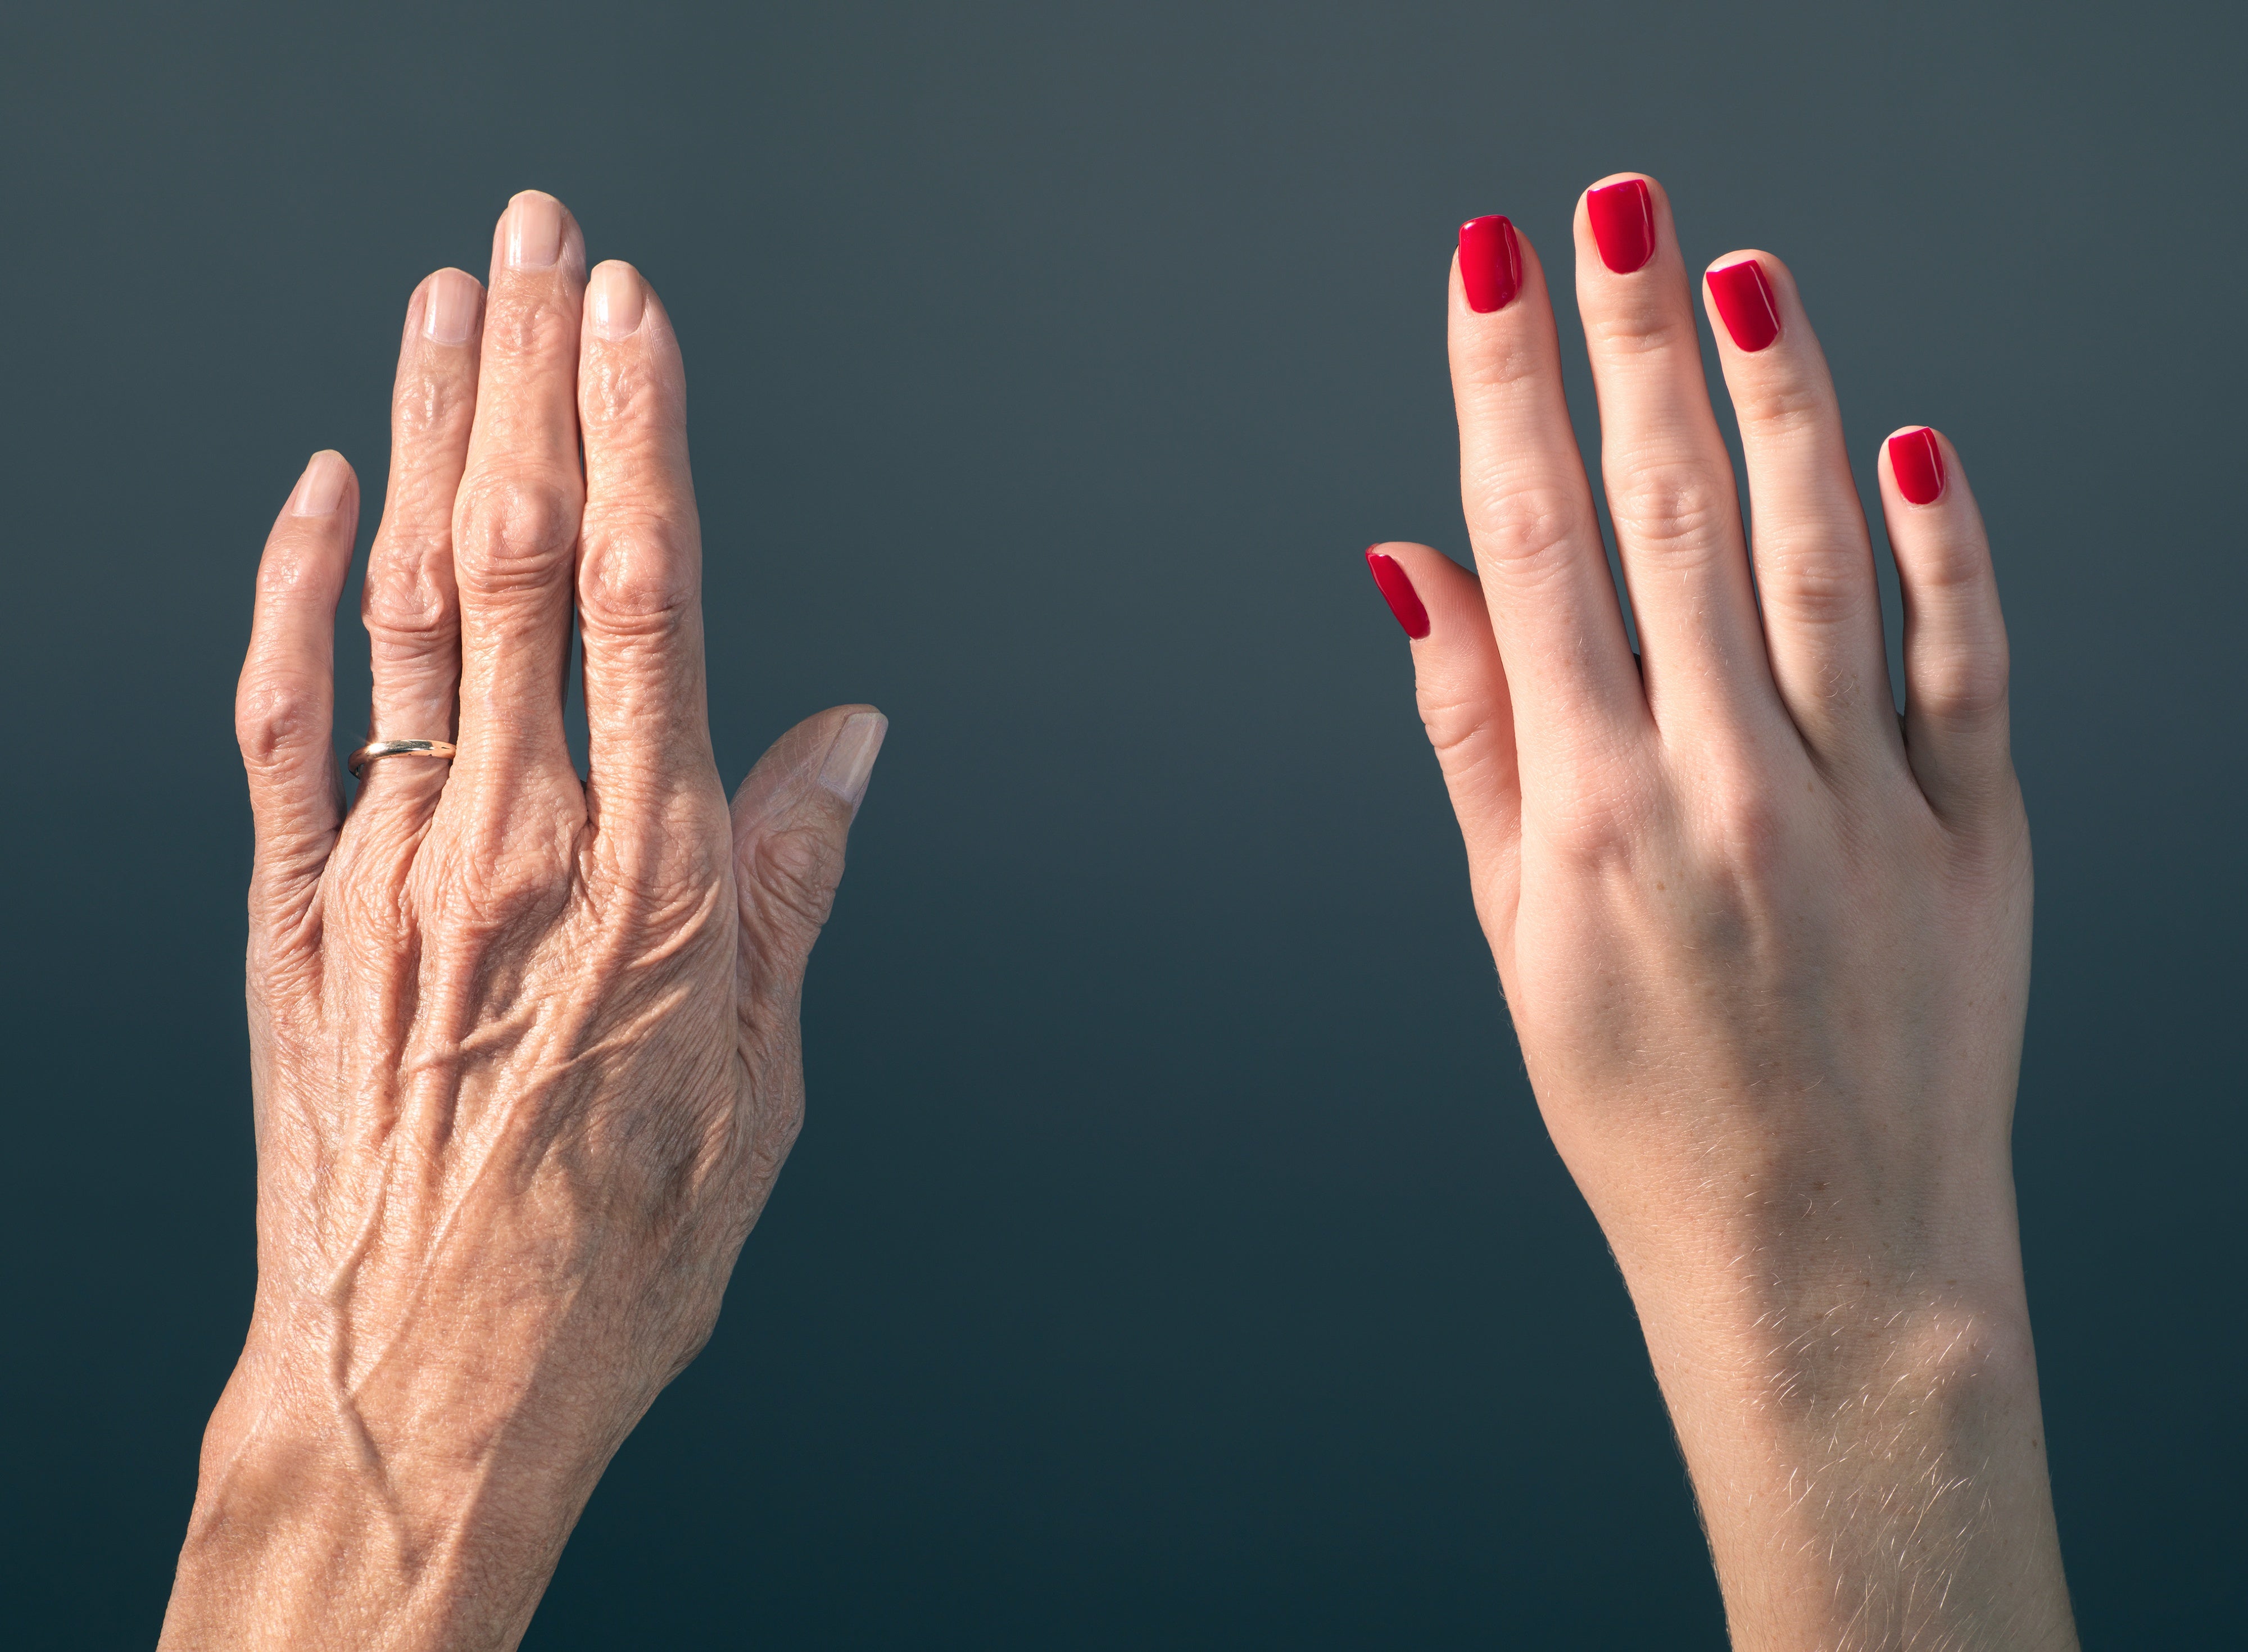 Why Do We Get Old, and Can Aging Be Reversed?